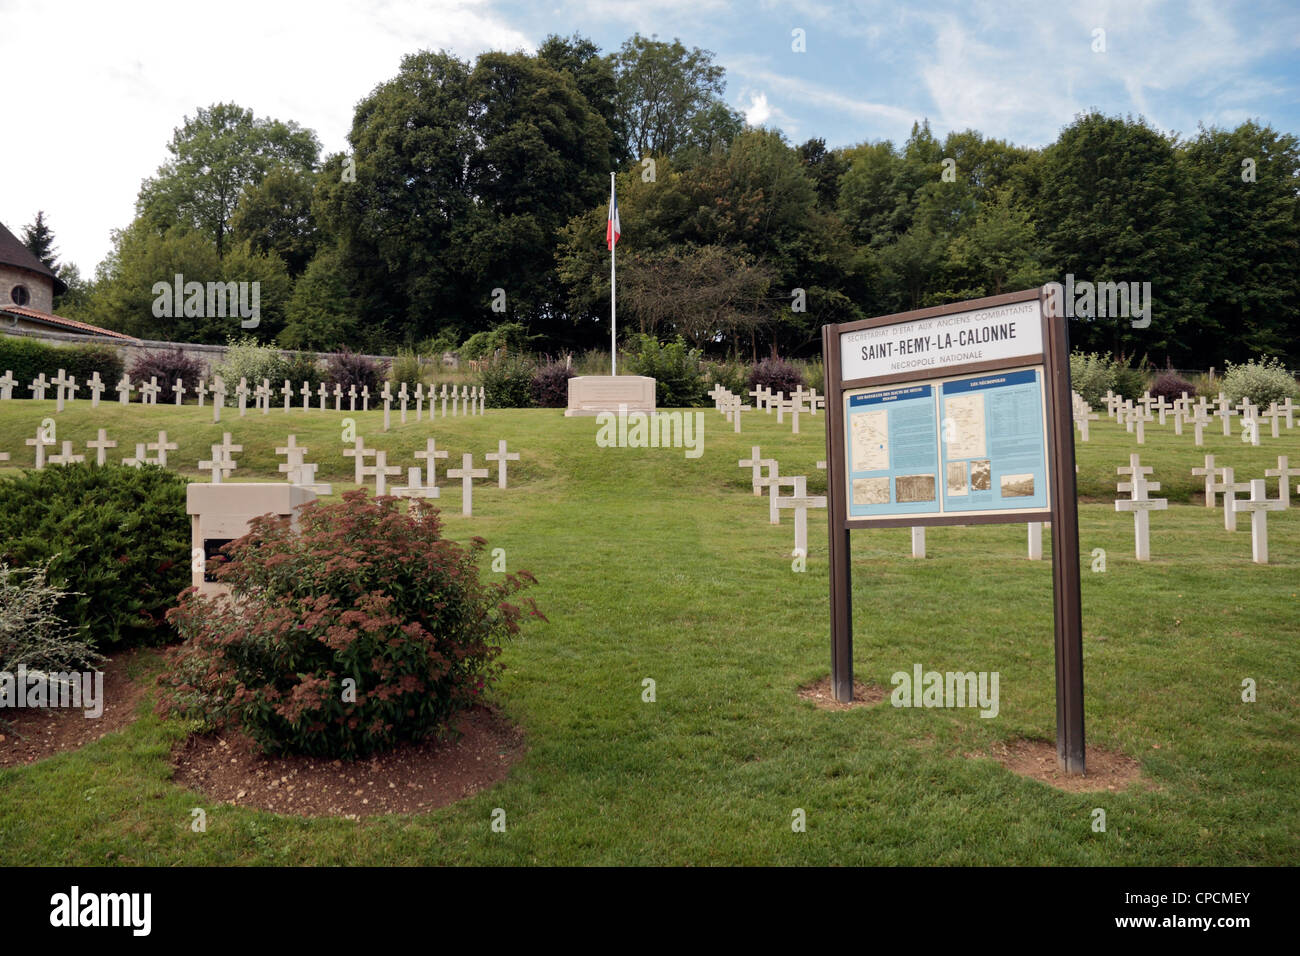 General view of the French National Cemetery St Remy La Calonne, Les Eparges, Lorraine, France. Stock Photo